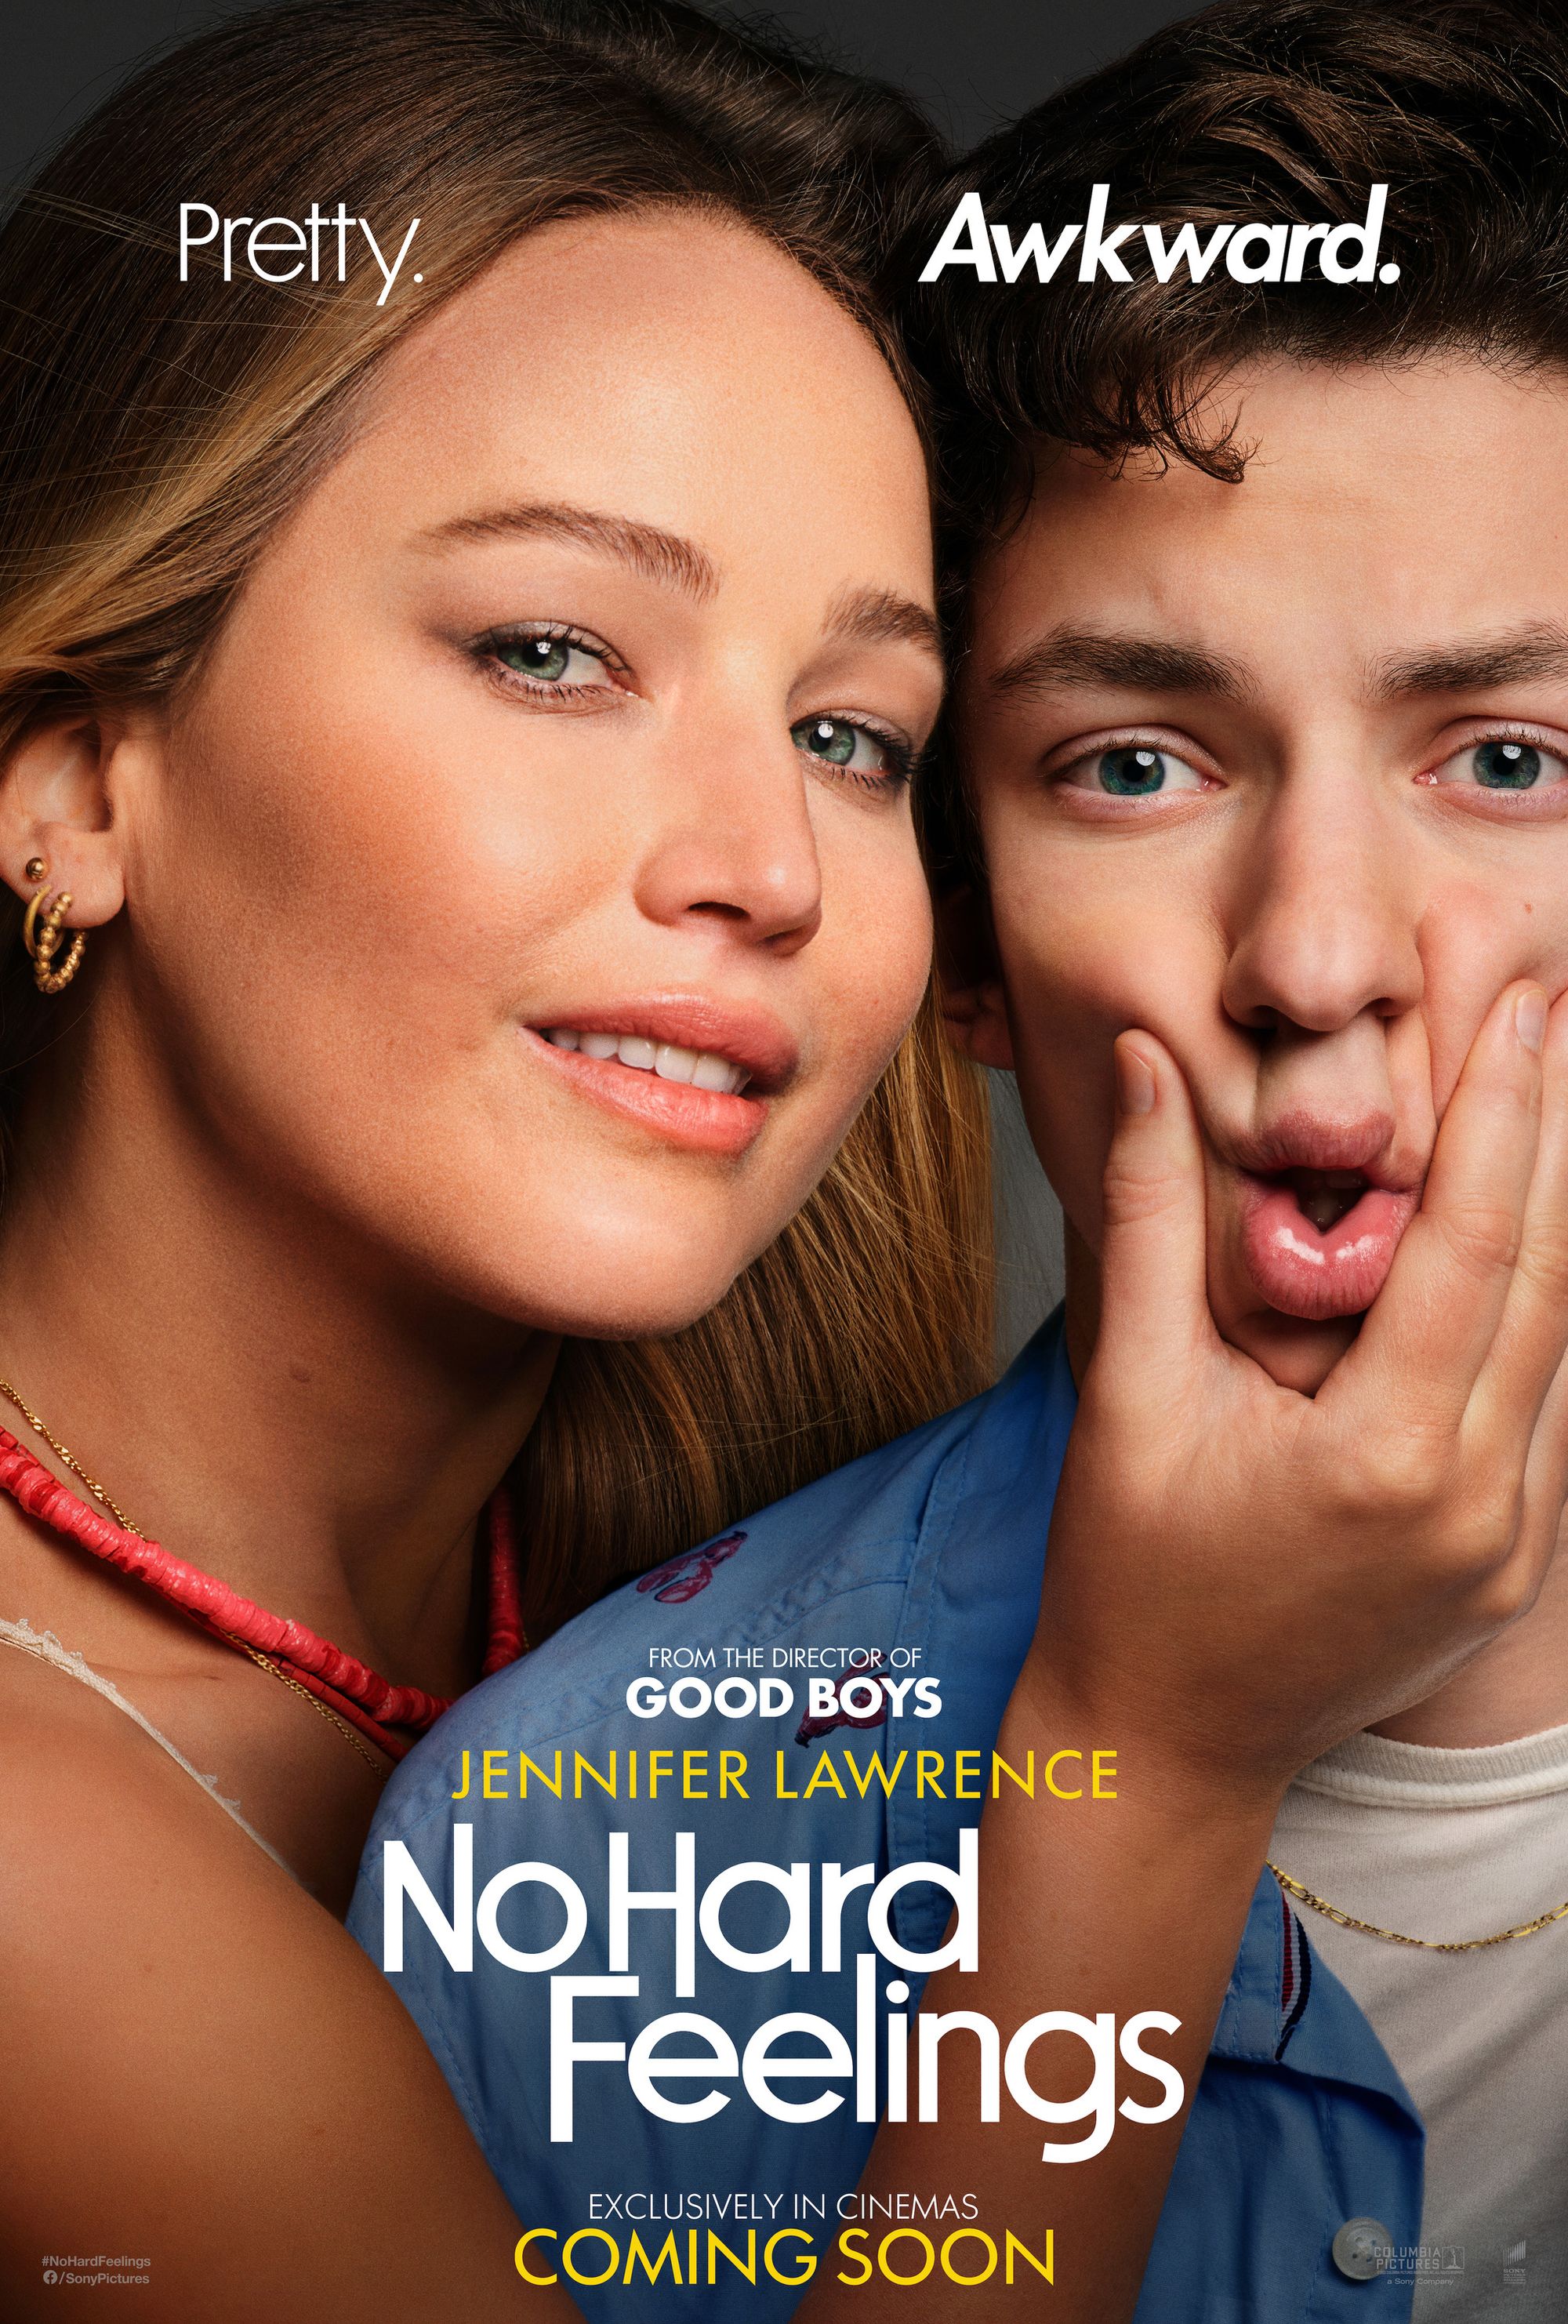 The movie poster for No Hard Feelings